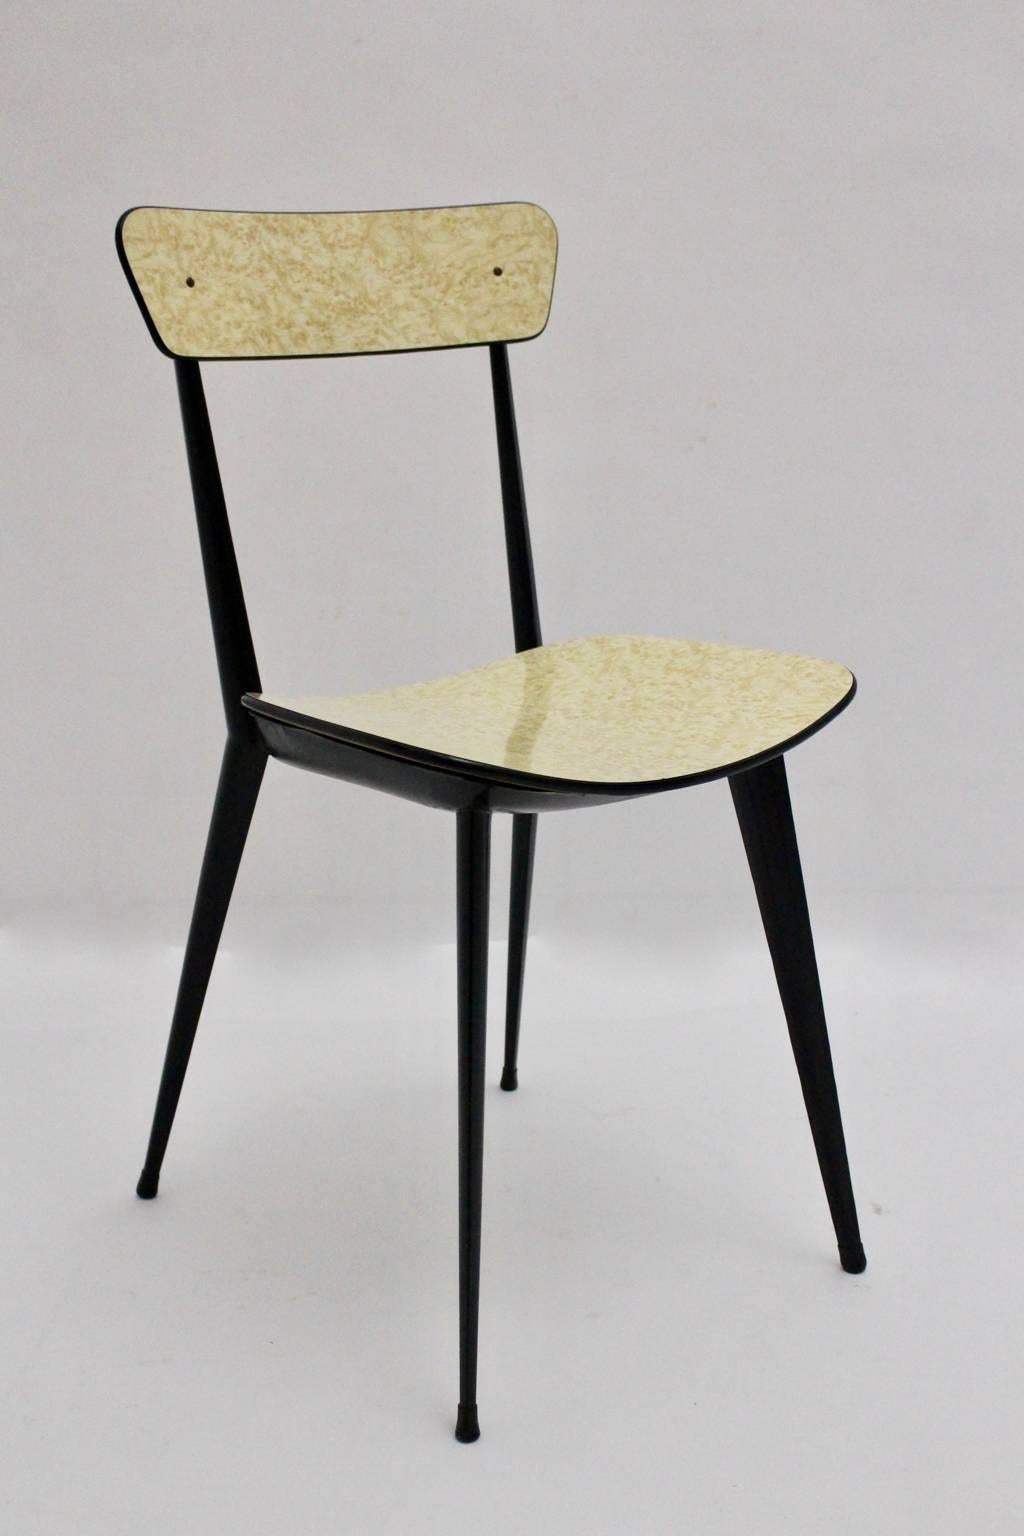 Mid Century Modern Black Metal Dining Chairs Style Carlo di Carli, Italy 1950s For Sale 3